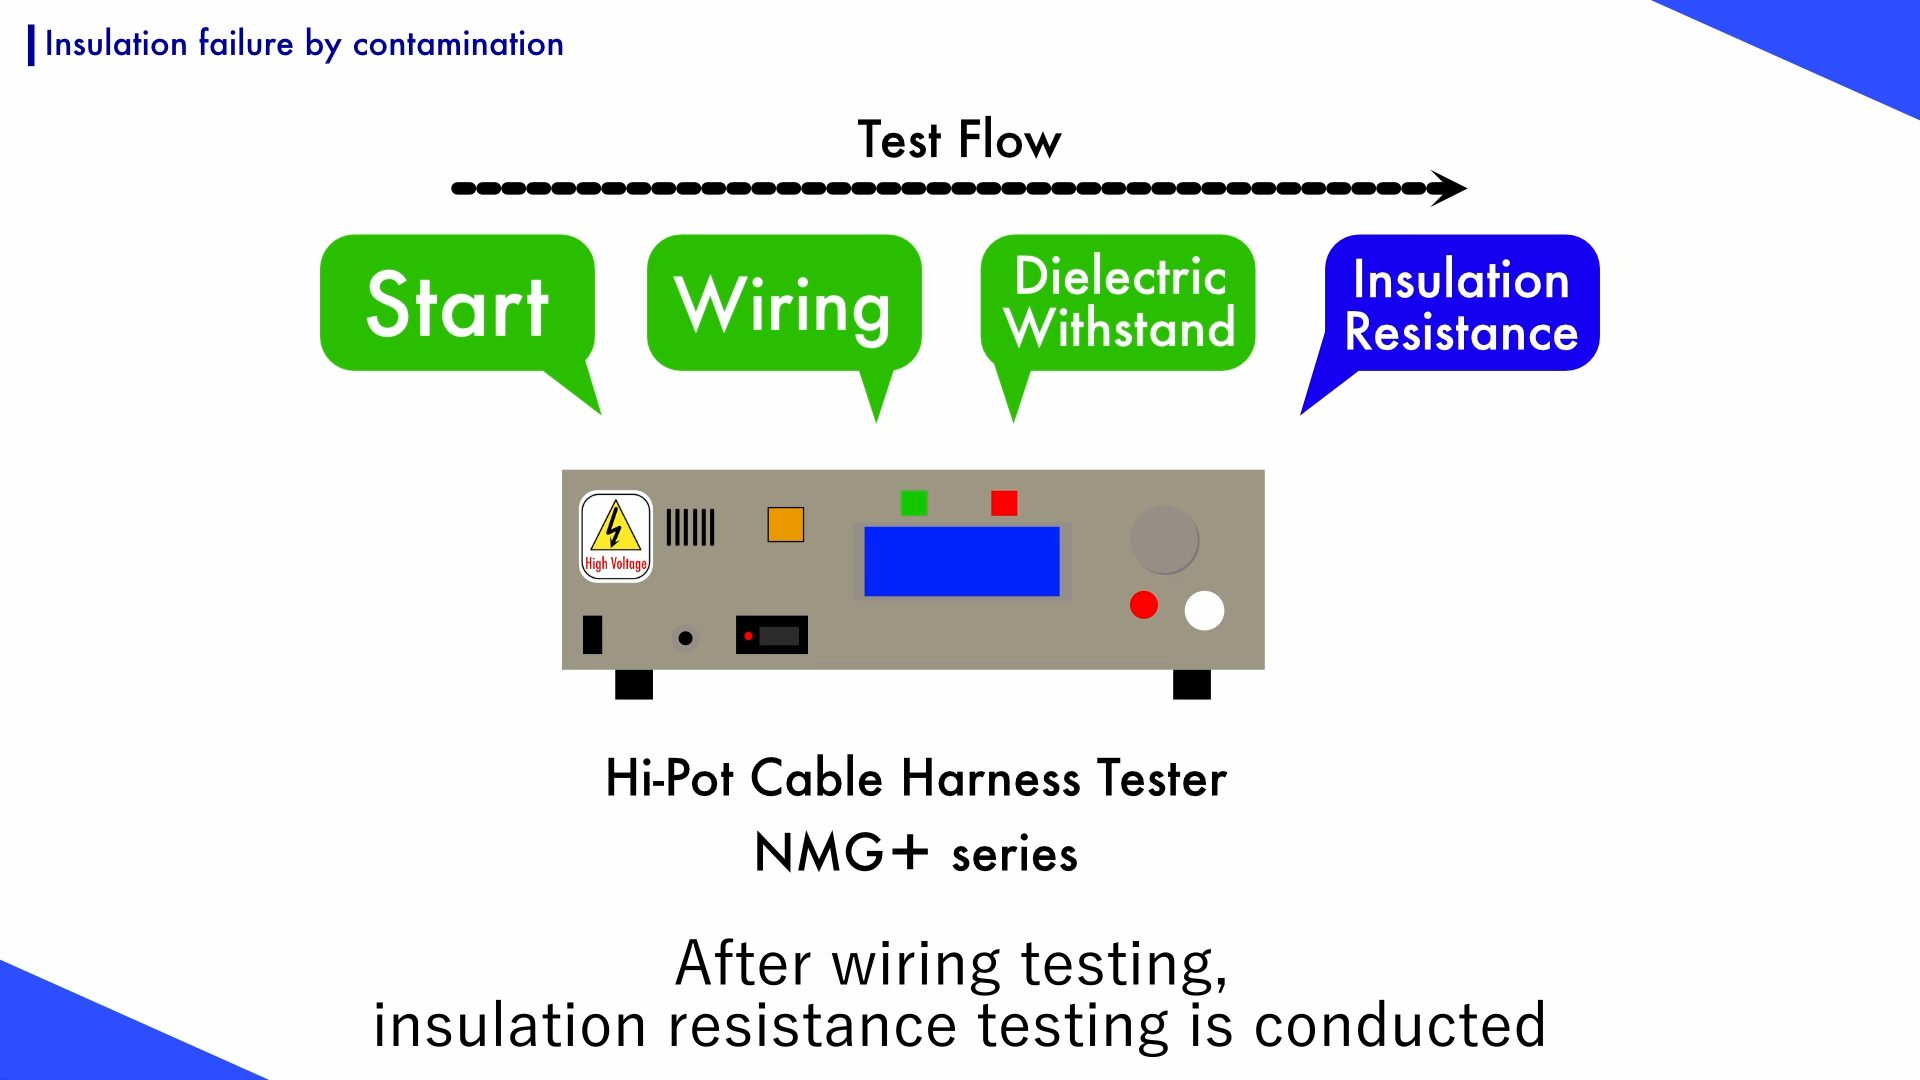 Insulation resistance test can be performed after wiring test